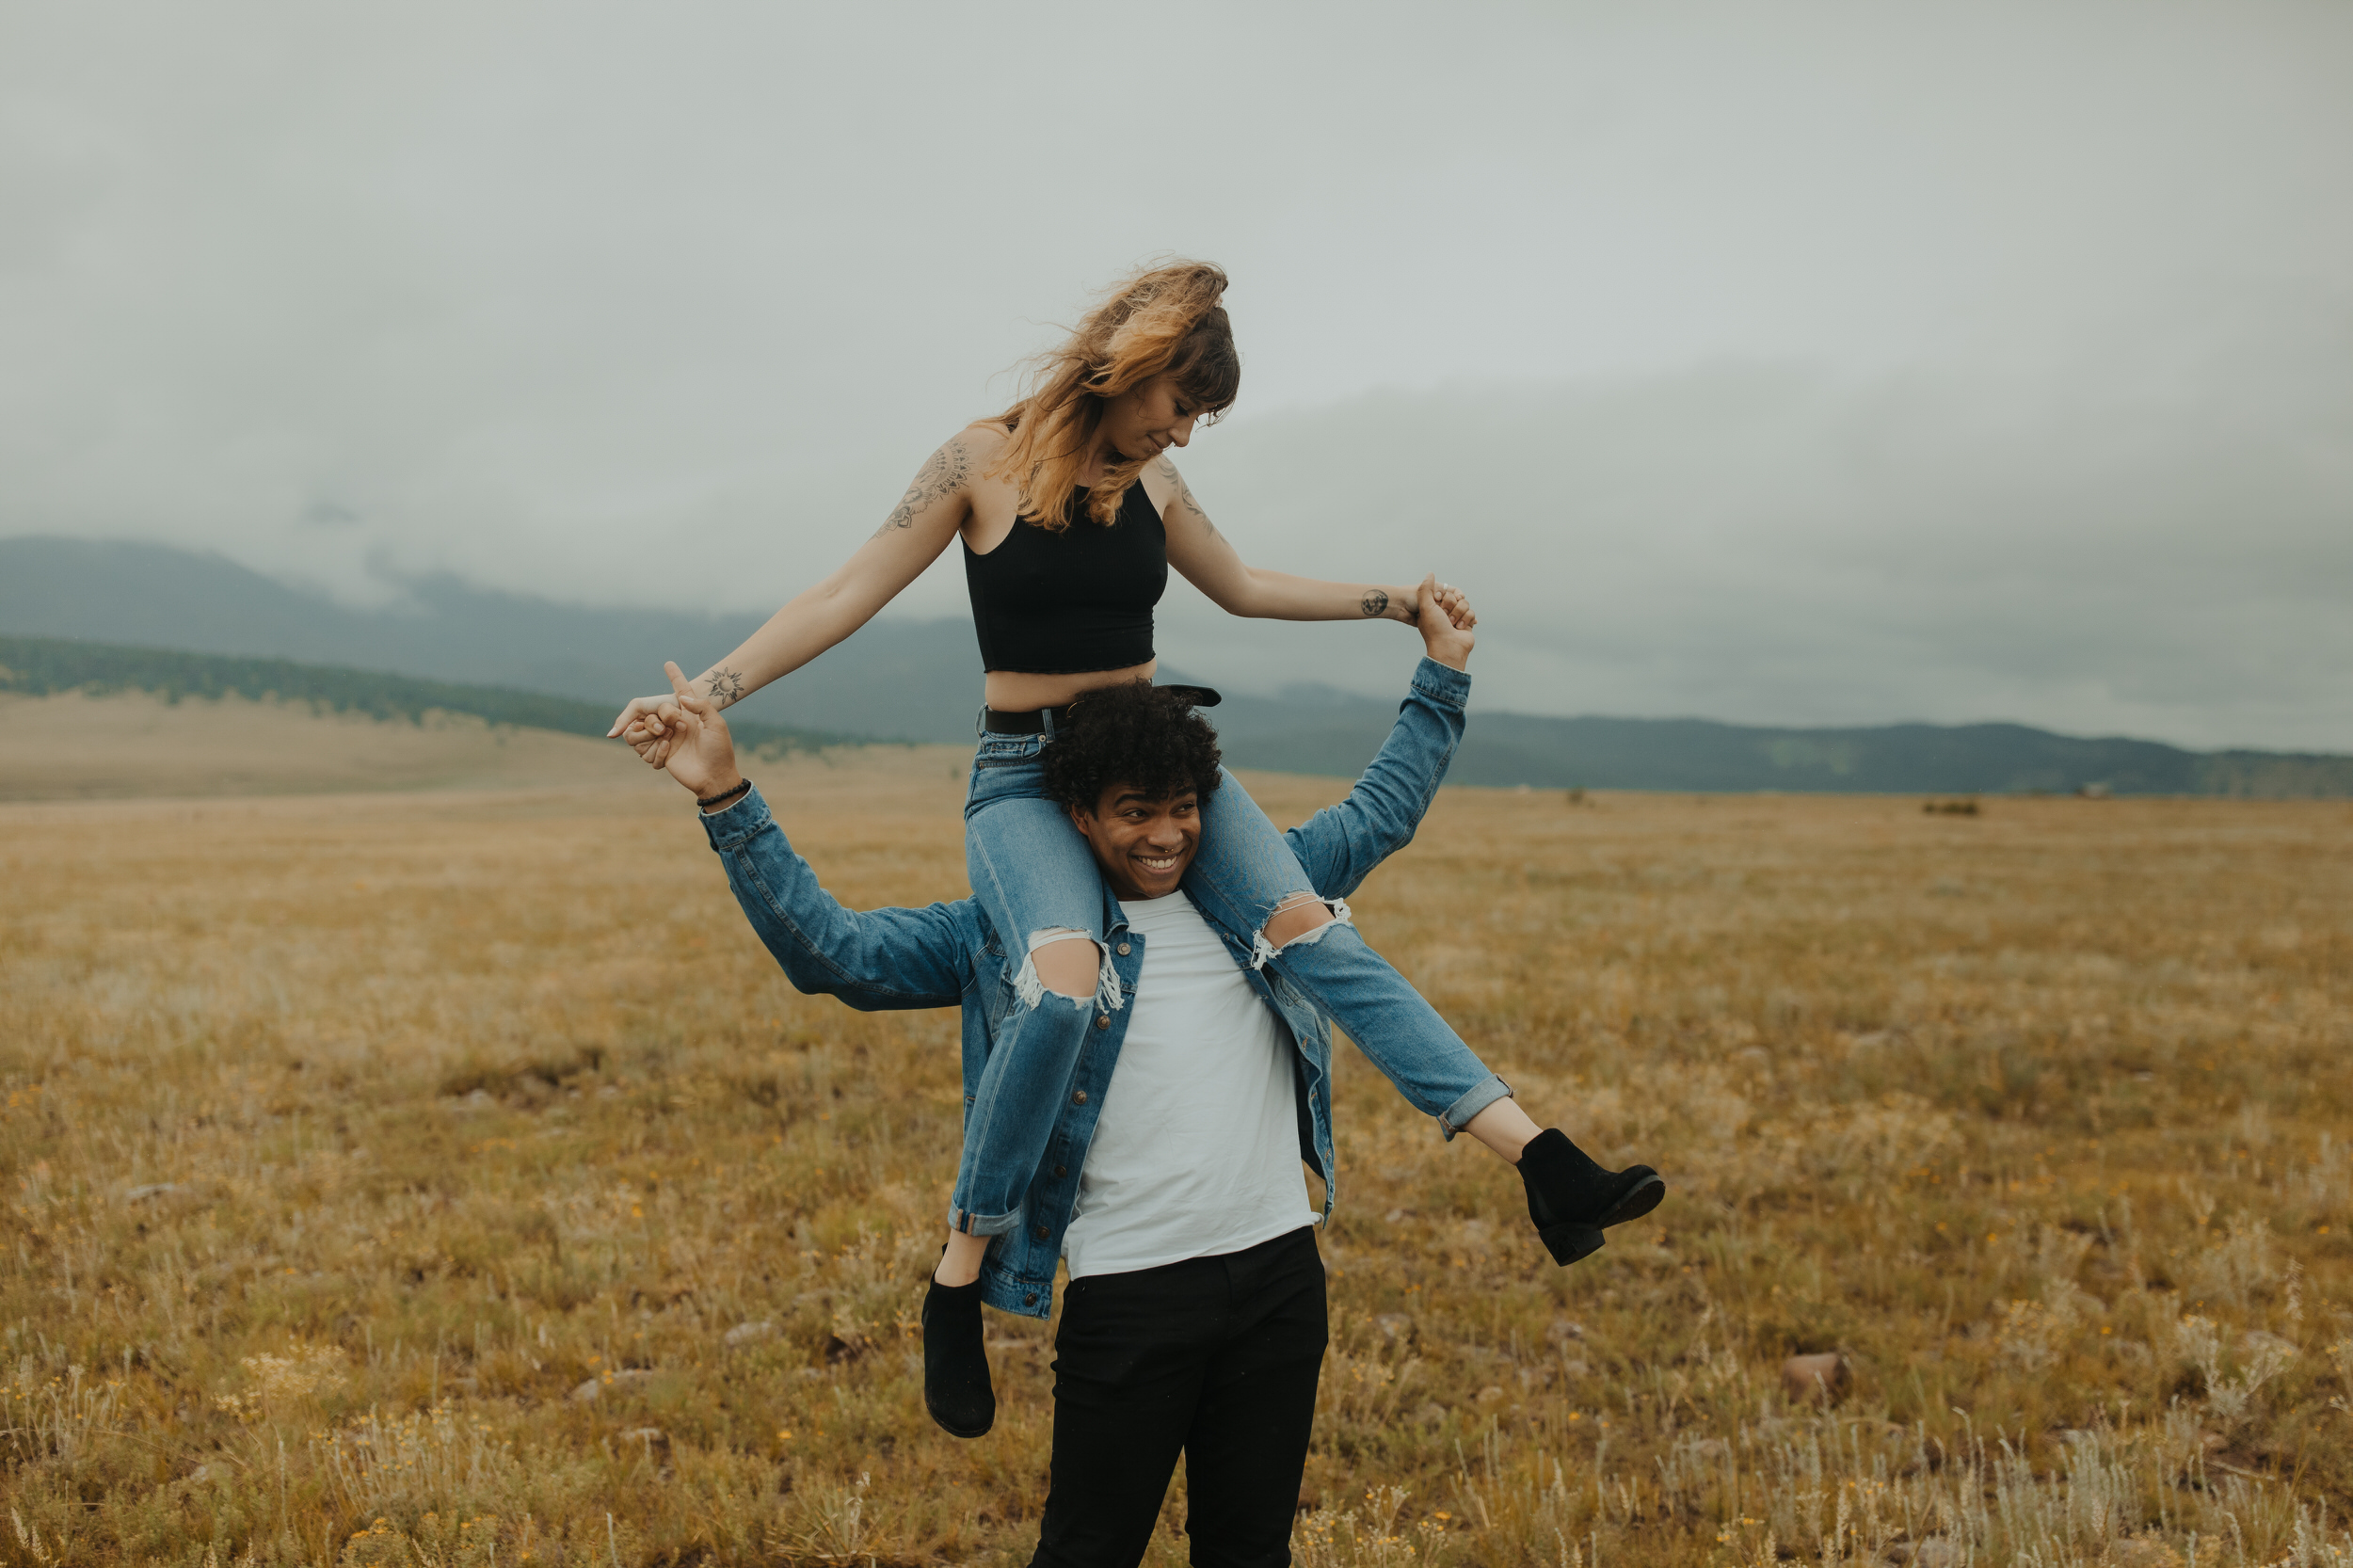 alt couple with boyfriend giving girlfriend piggy back ride in the mountains